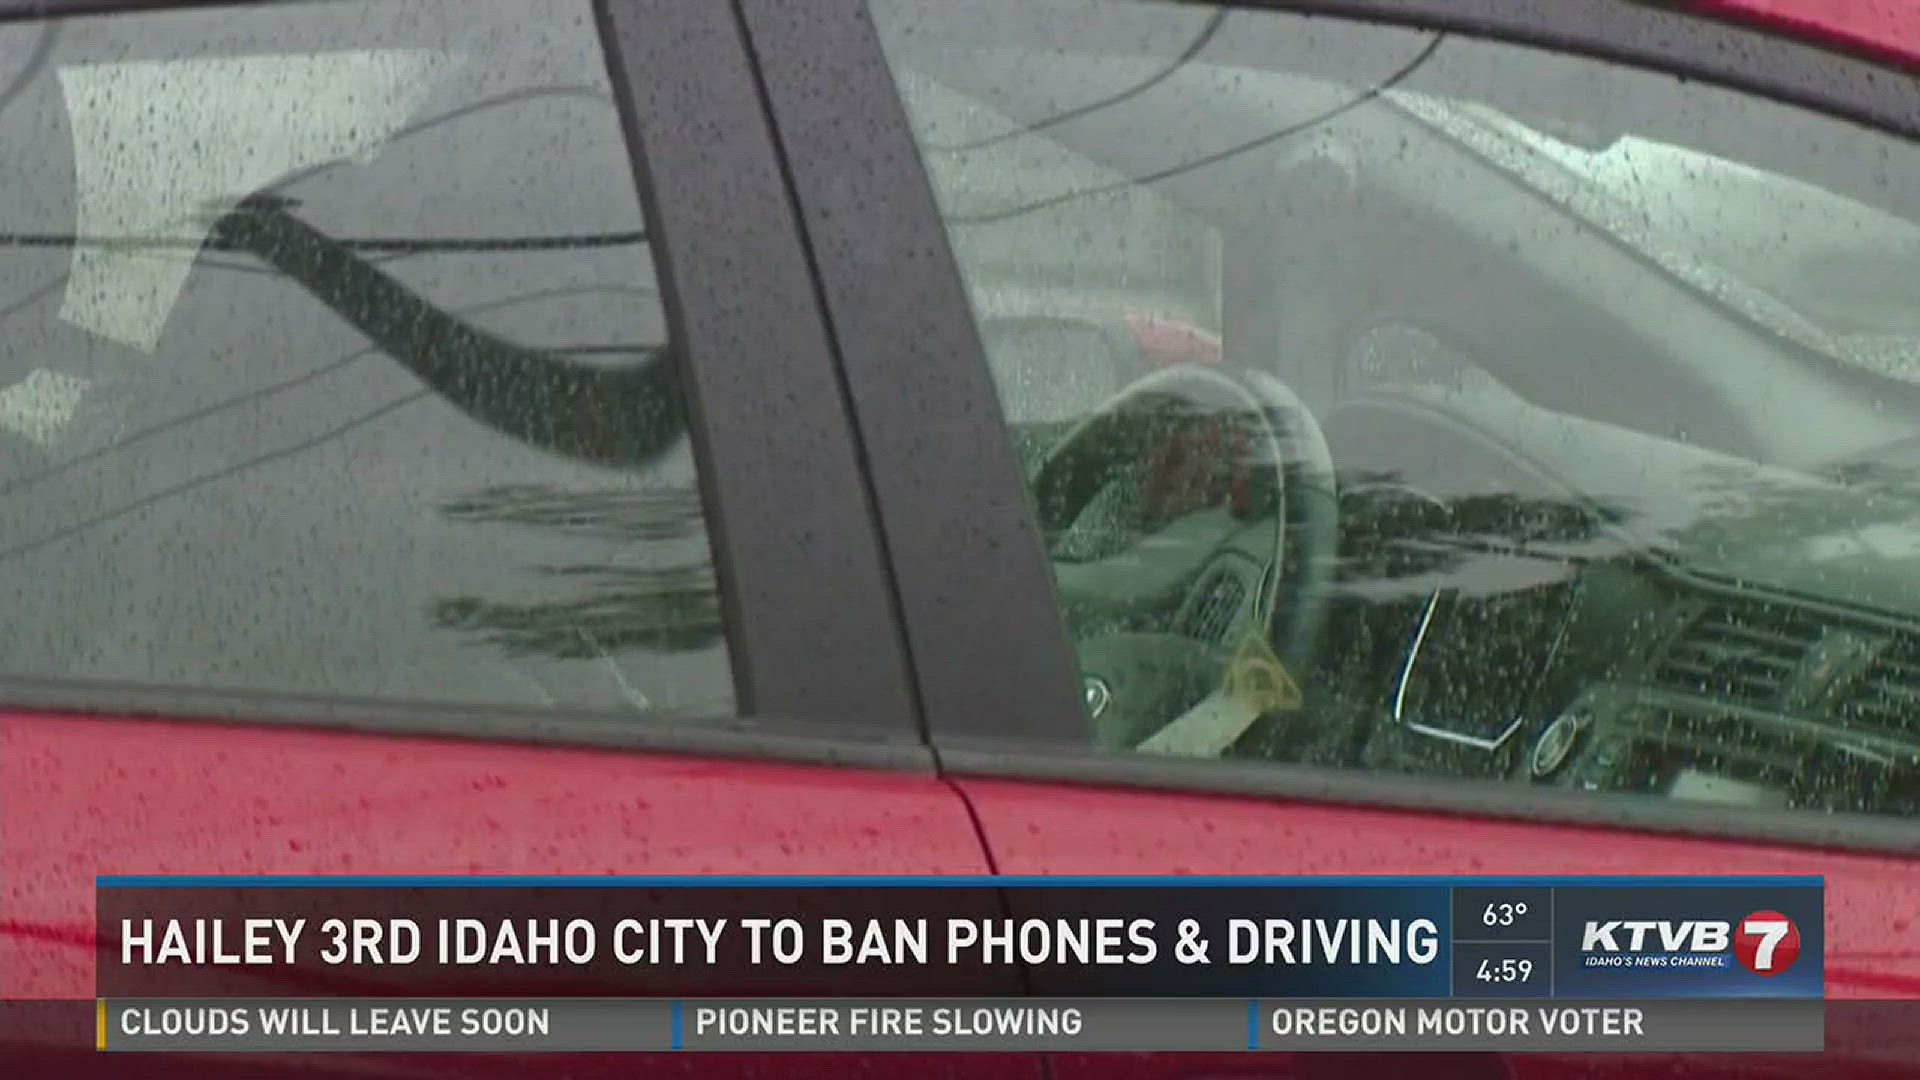 The ban on cell phones is now in effect.